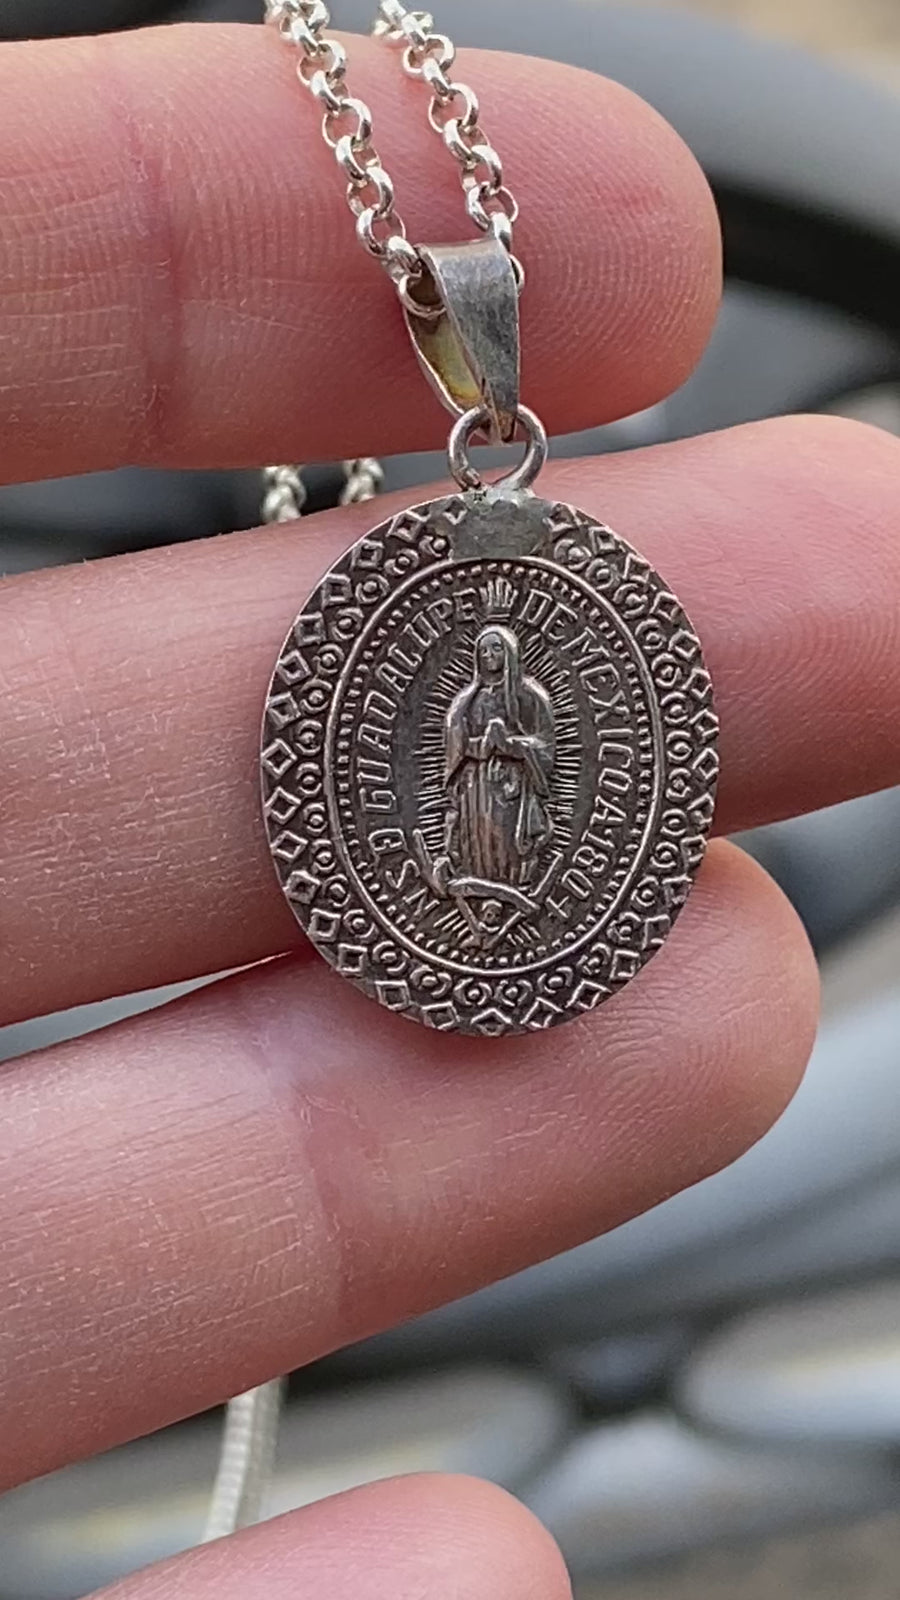 Our Lady of Guadalupe Medal Pendant